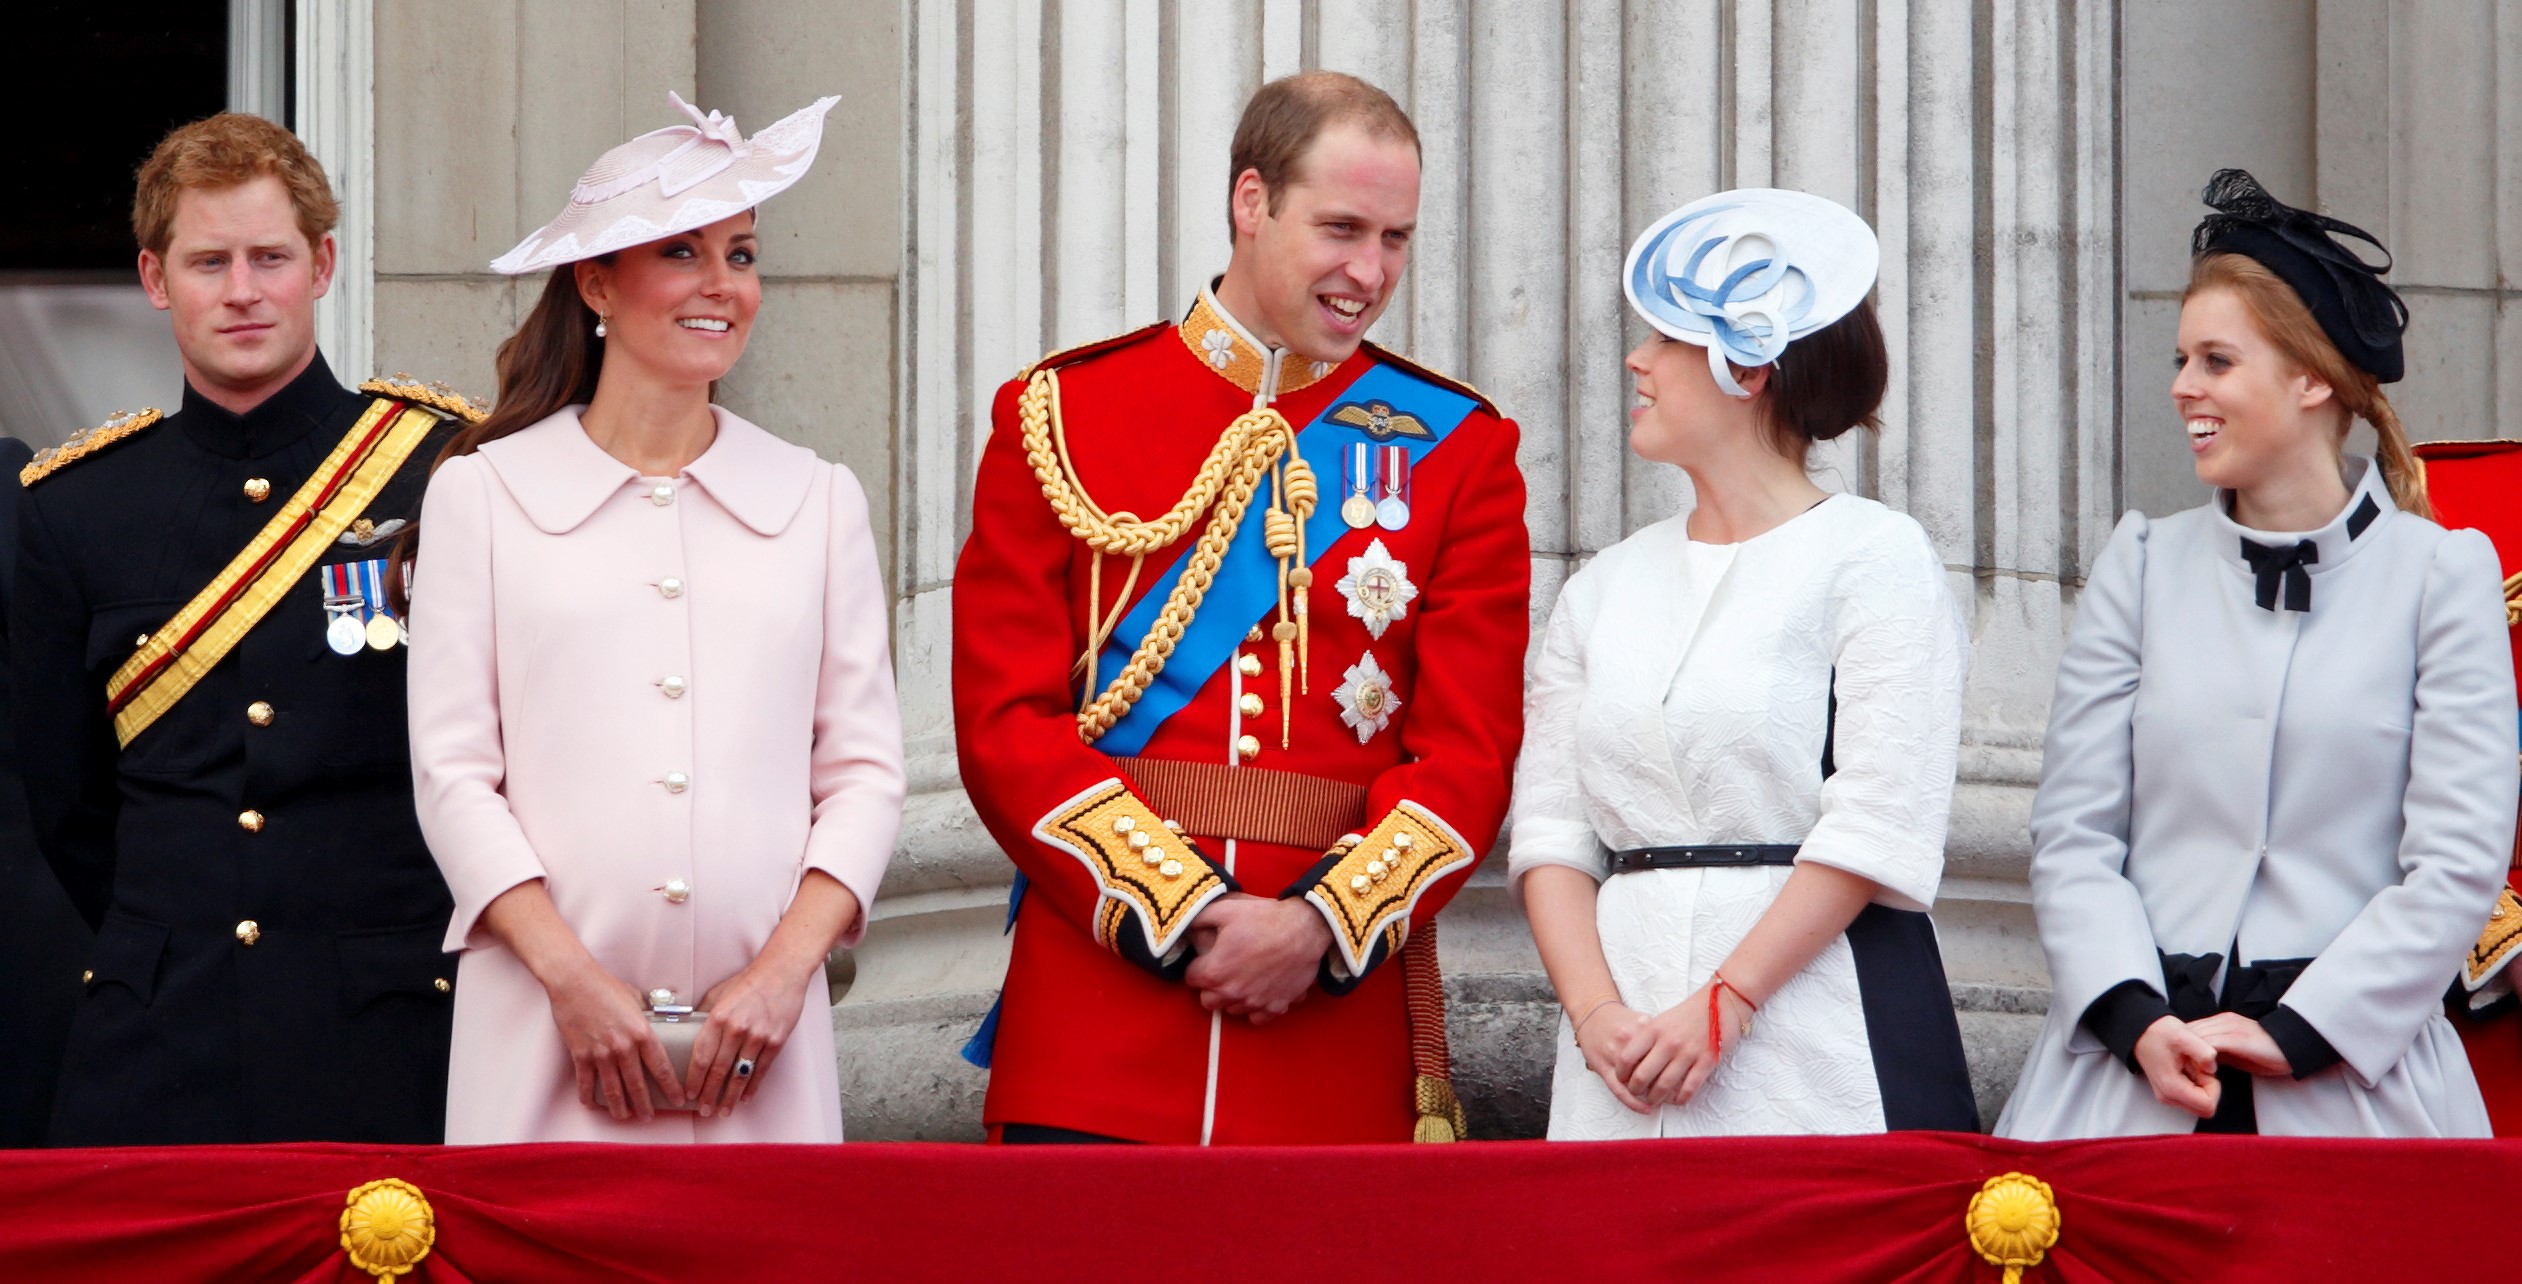 From L to R: Prince Harry, Kate Middleton, Prince William, Princess Eugenie, and Princess Beatrice